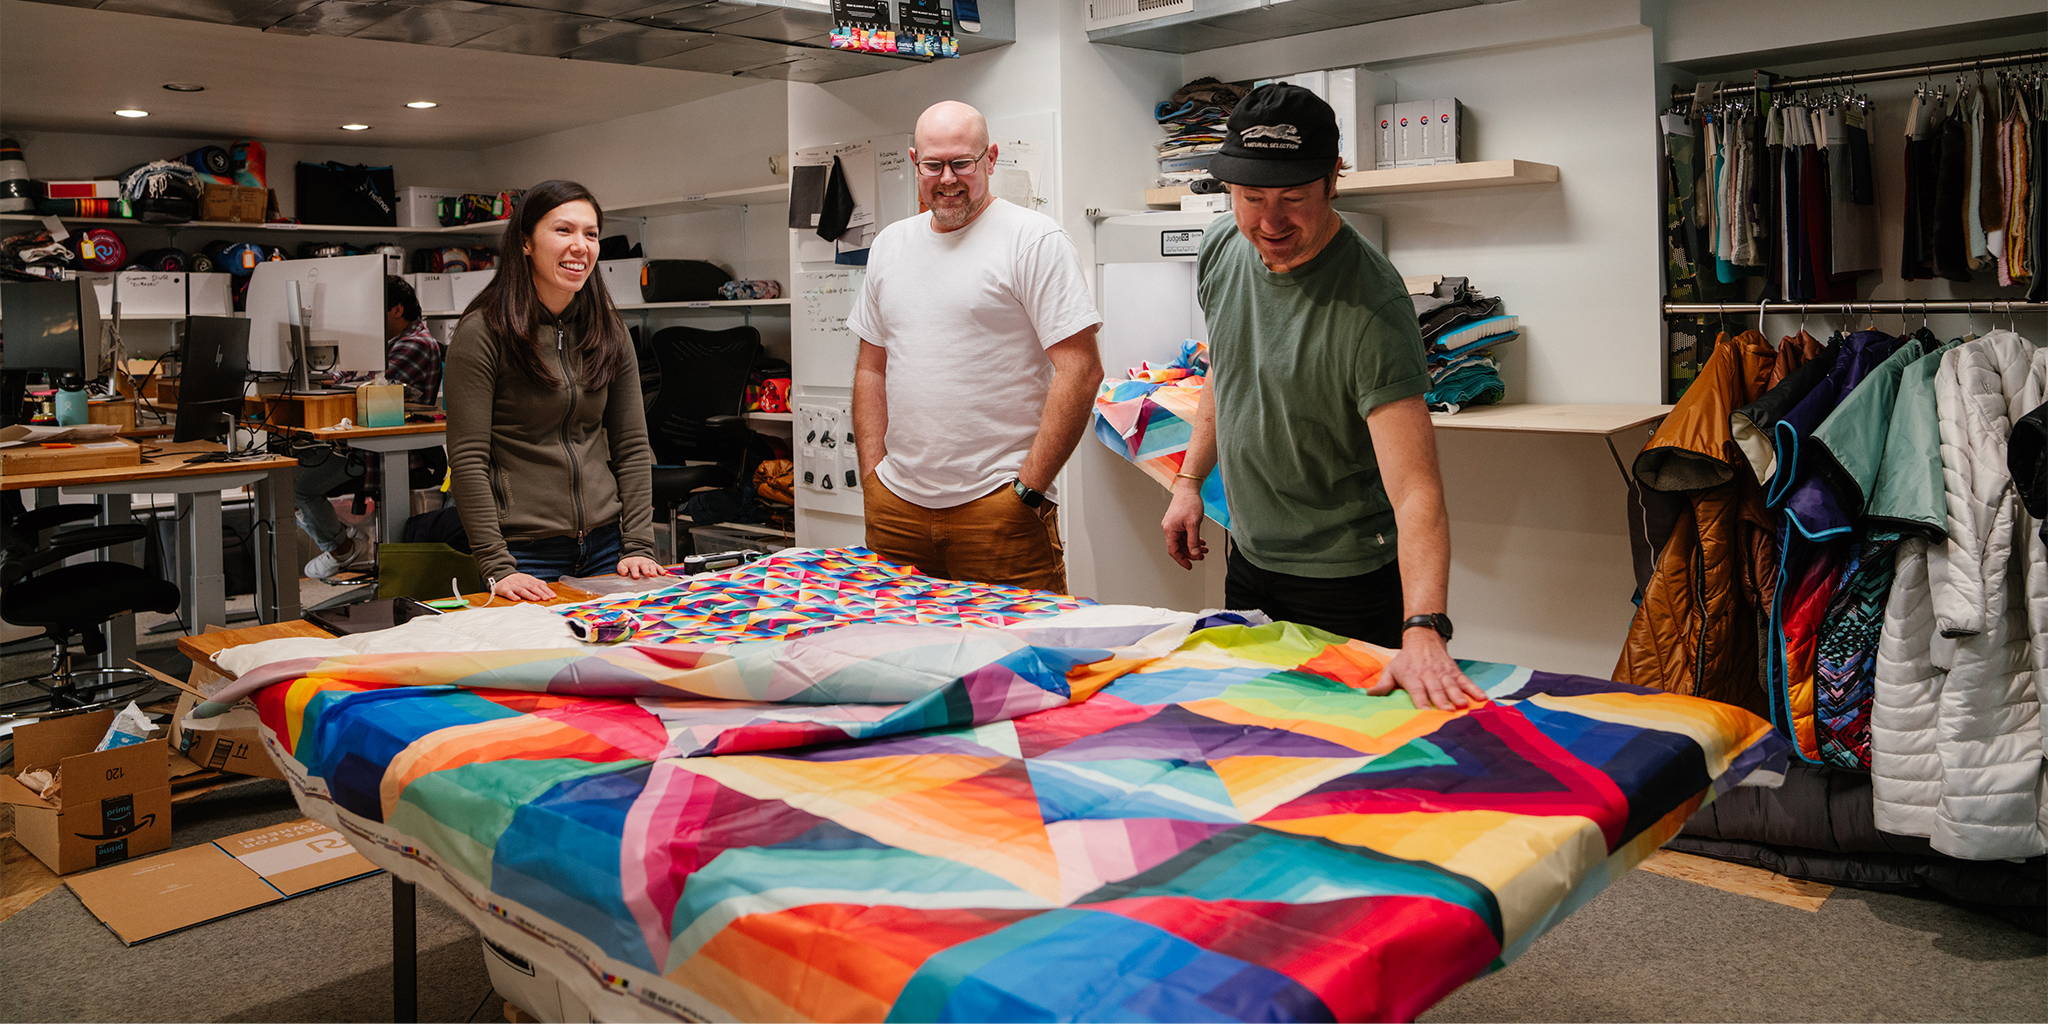 Nathan Brown working with the Rumpl team in Portland, Oregon to develop the Cozy Dimensions collection, complete with two outdoor blankets, an outdoor mat, and a beer blanket.